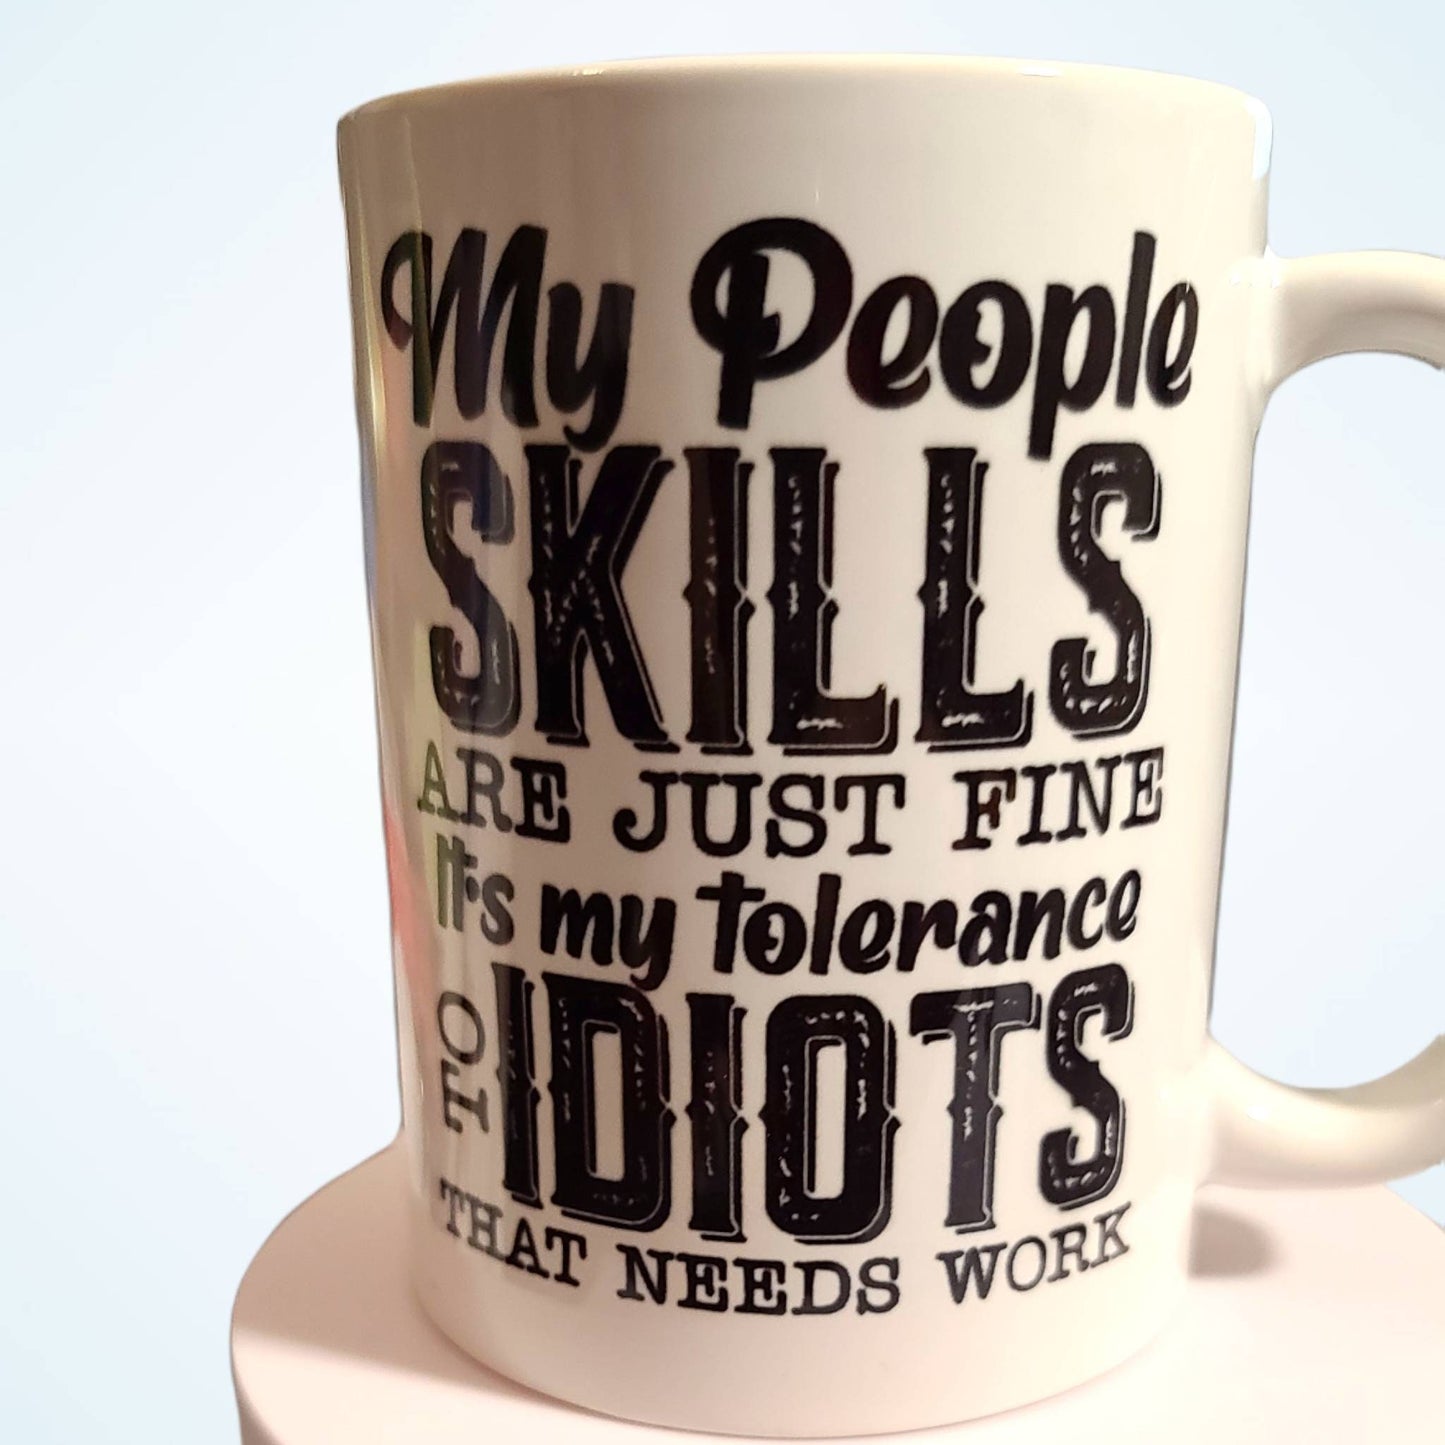 Coffee mug with sarcasm or funny quote. Coffee cup with humor. Customized teacup for a gift. Drinkware with a people skills and idiot quote.